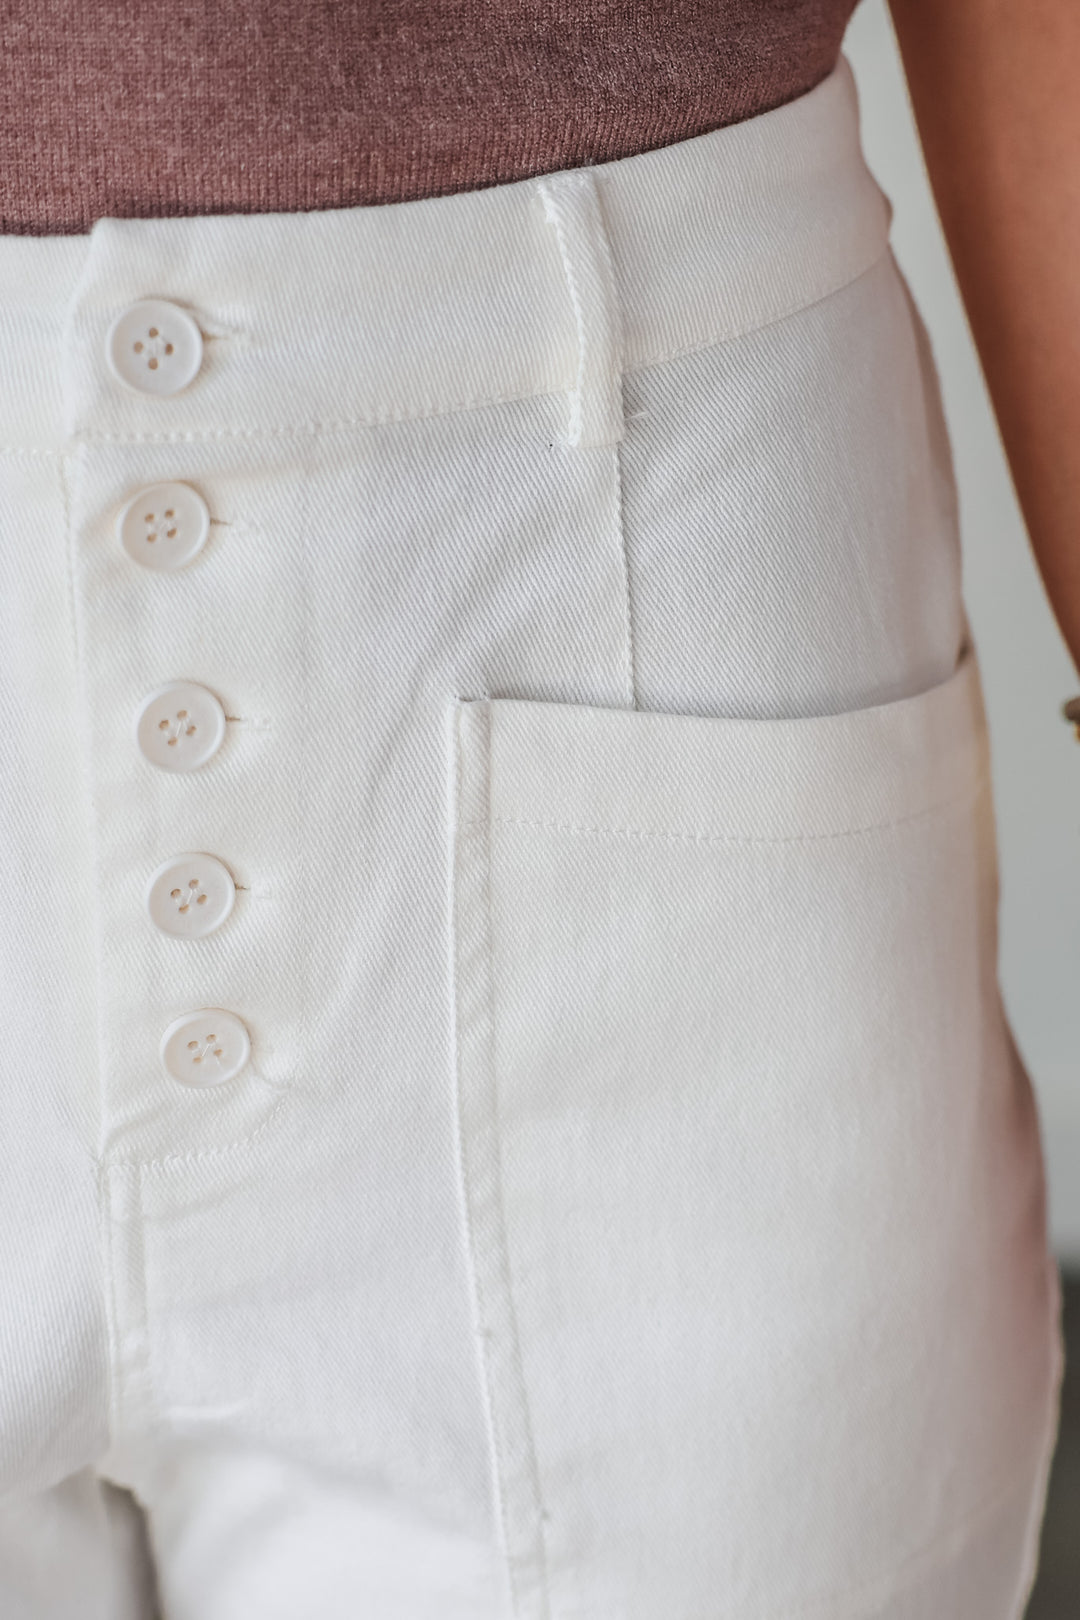 A closeup of the button closure and pockets on white cotton twill pants.